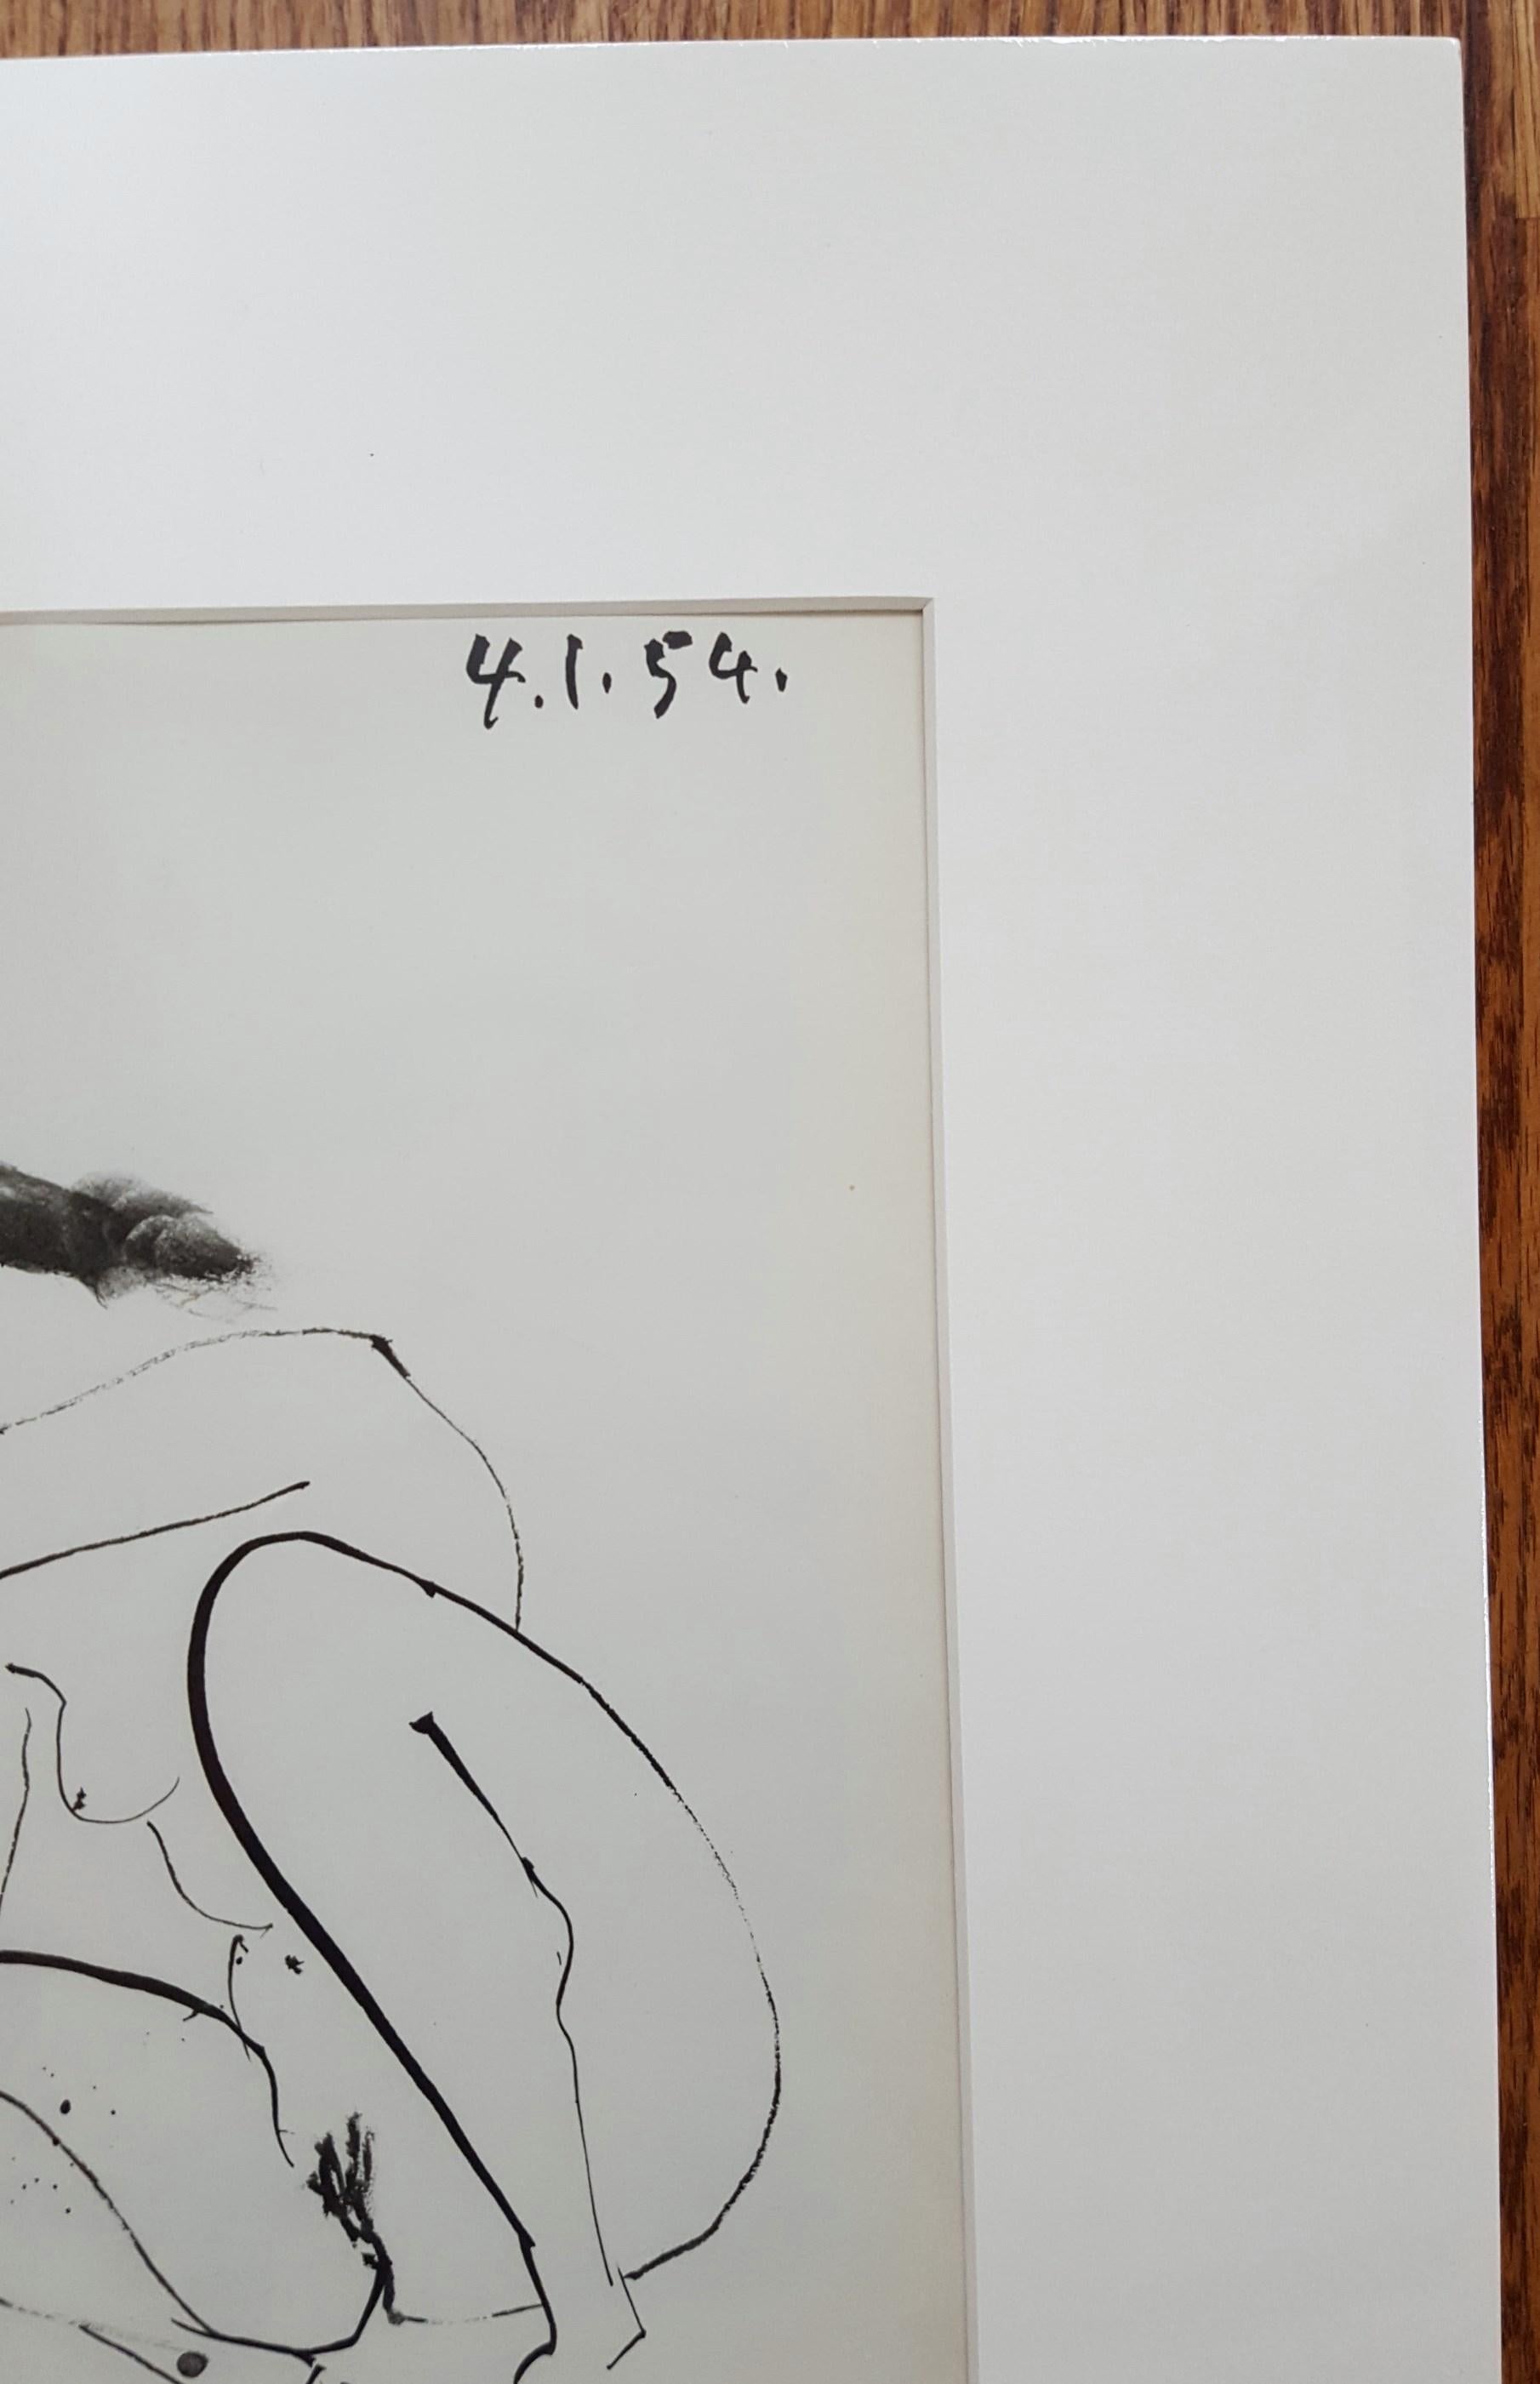 An original heliogravure on smooth wove paper after a drawing by Spanish artist Pablo Picasso (1881-1973) titled 